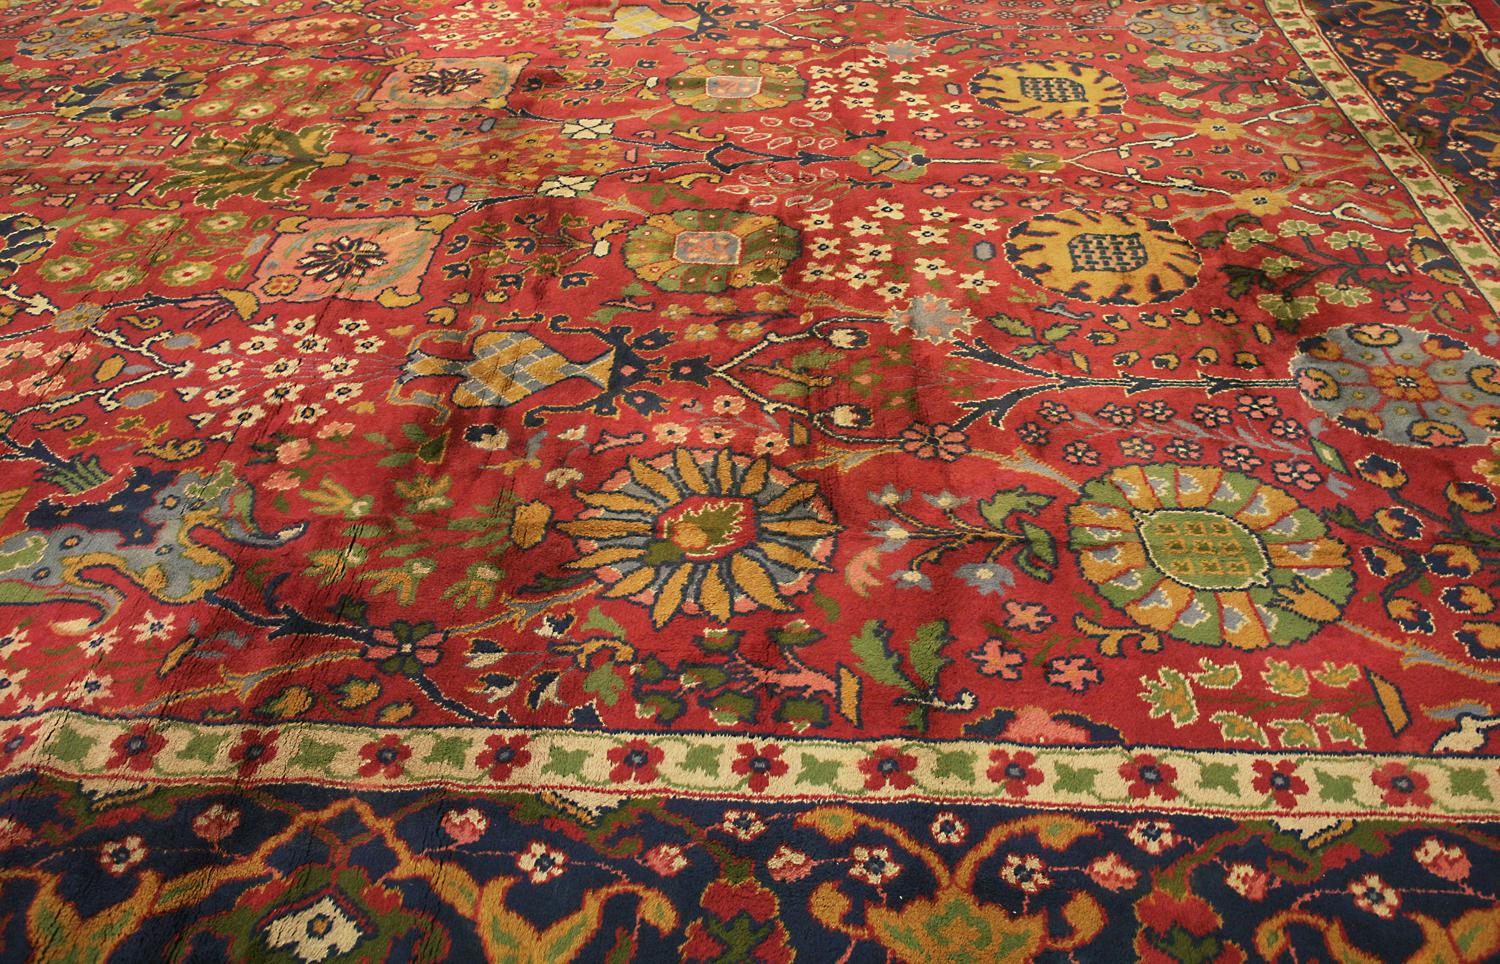 Circa 1920 Oversized Antique English Wool Donegal Carpet, Red Field For Sale 5